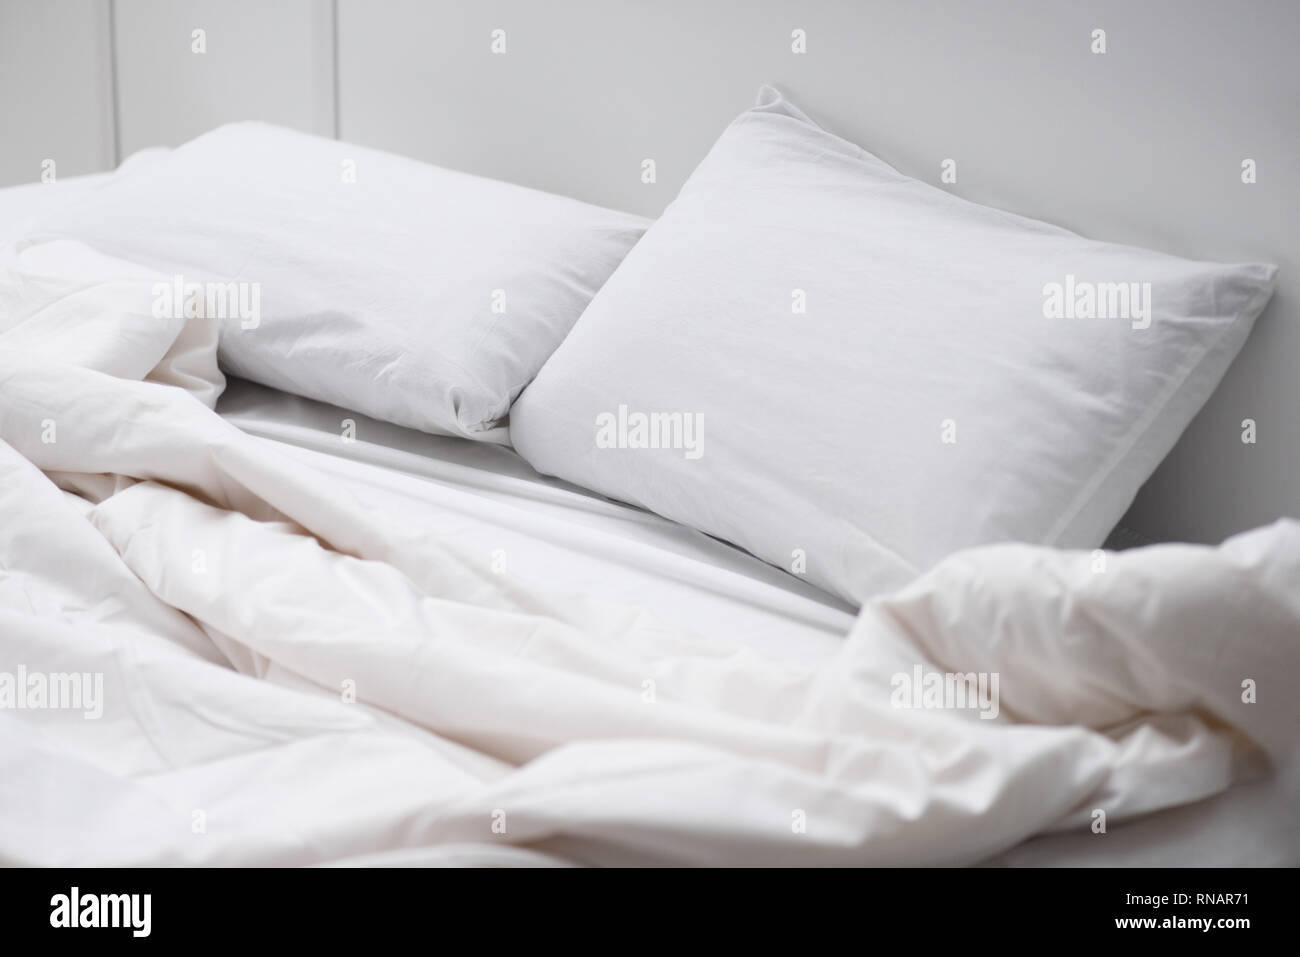 empty-bed-with-white-pillows-and-blanket-RNAR71